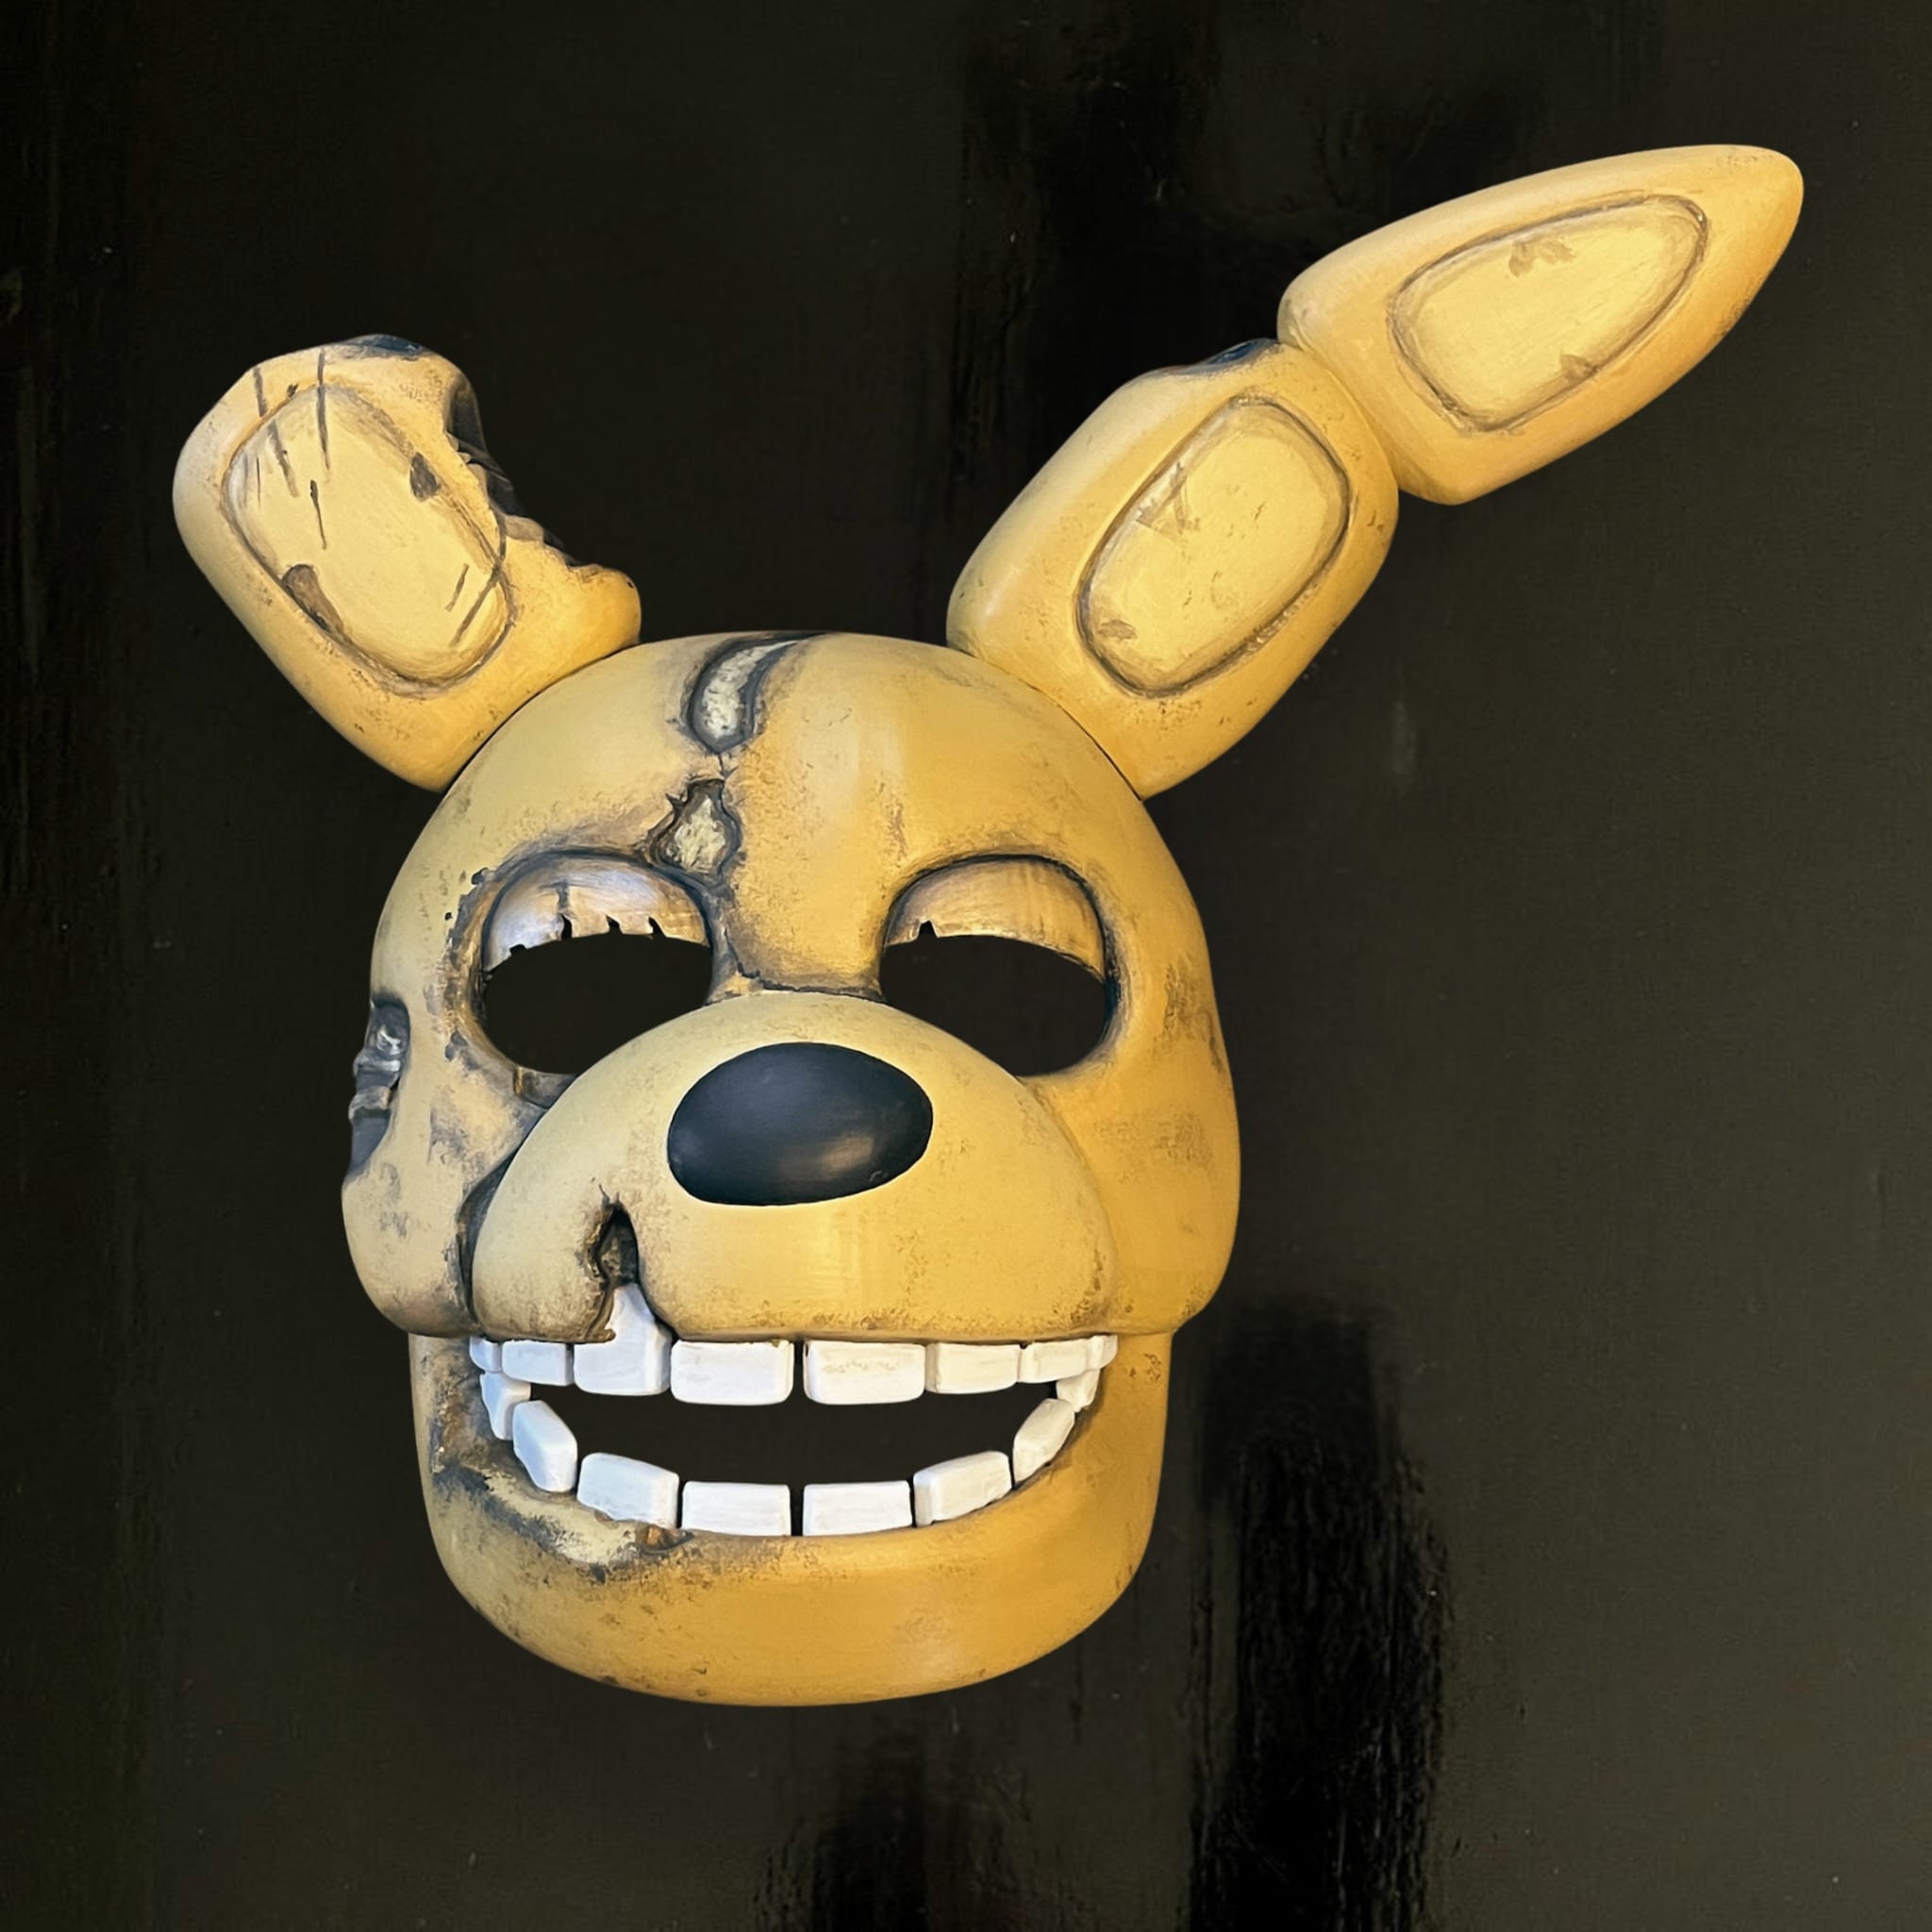 5 Nights At Freddys Creepy Party Dog Masks Featuring Fnaf, Y Chica, Freddy,  Fazbear Bear Perfect Halloween Party Decorations And Gifts For Kids Y200103  D Dhhm2 From Bdesybag, $16.13